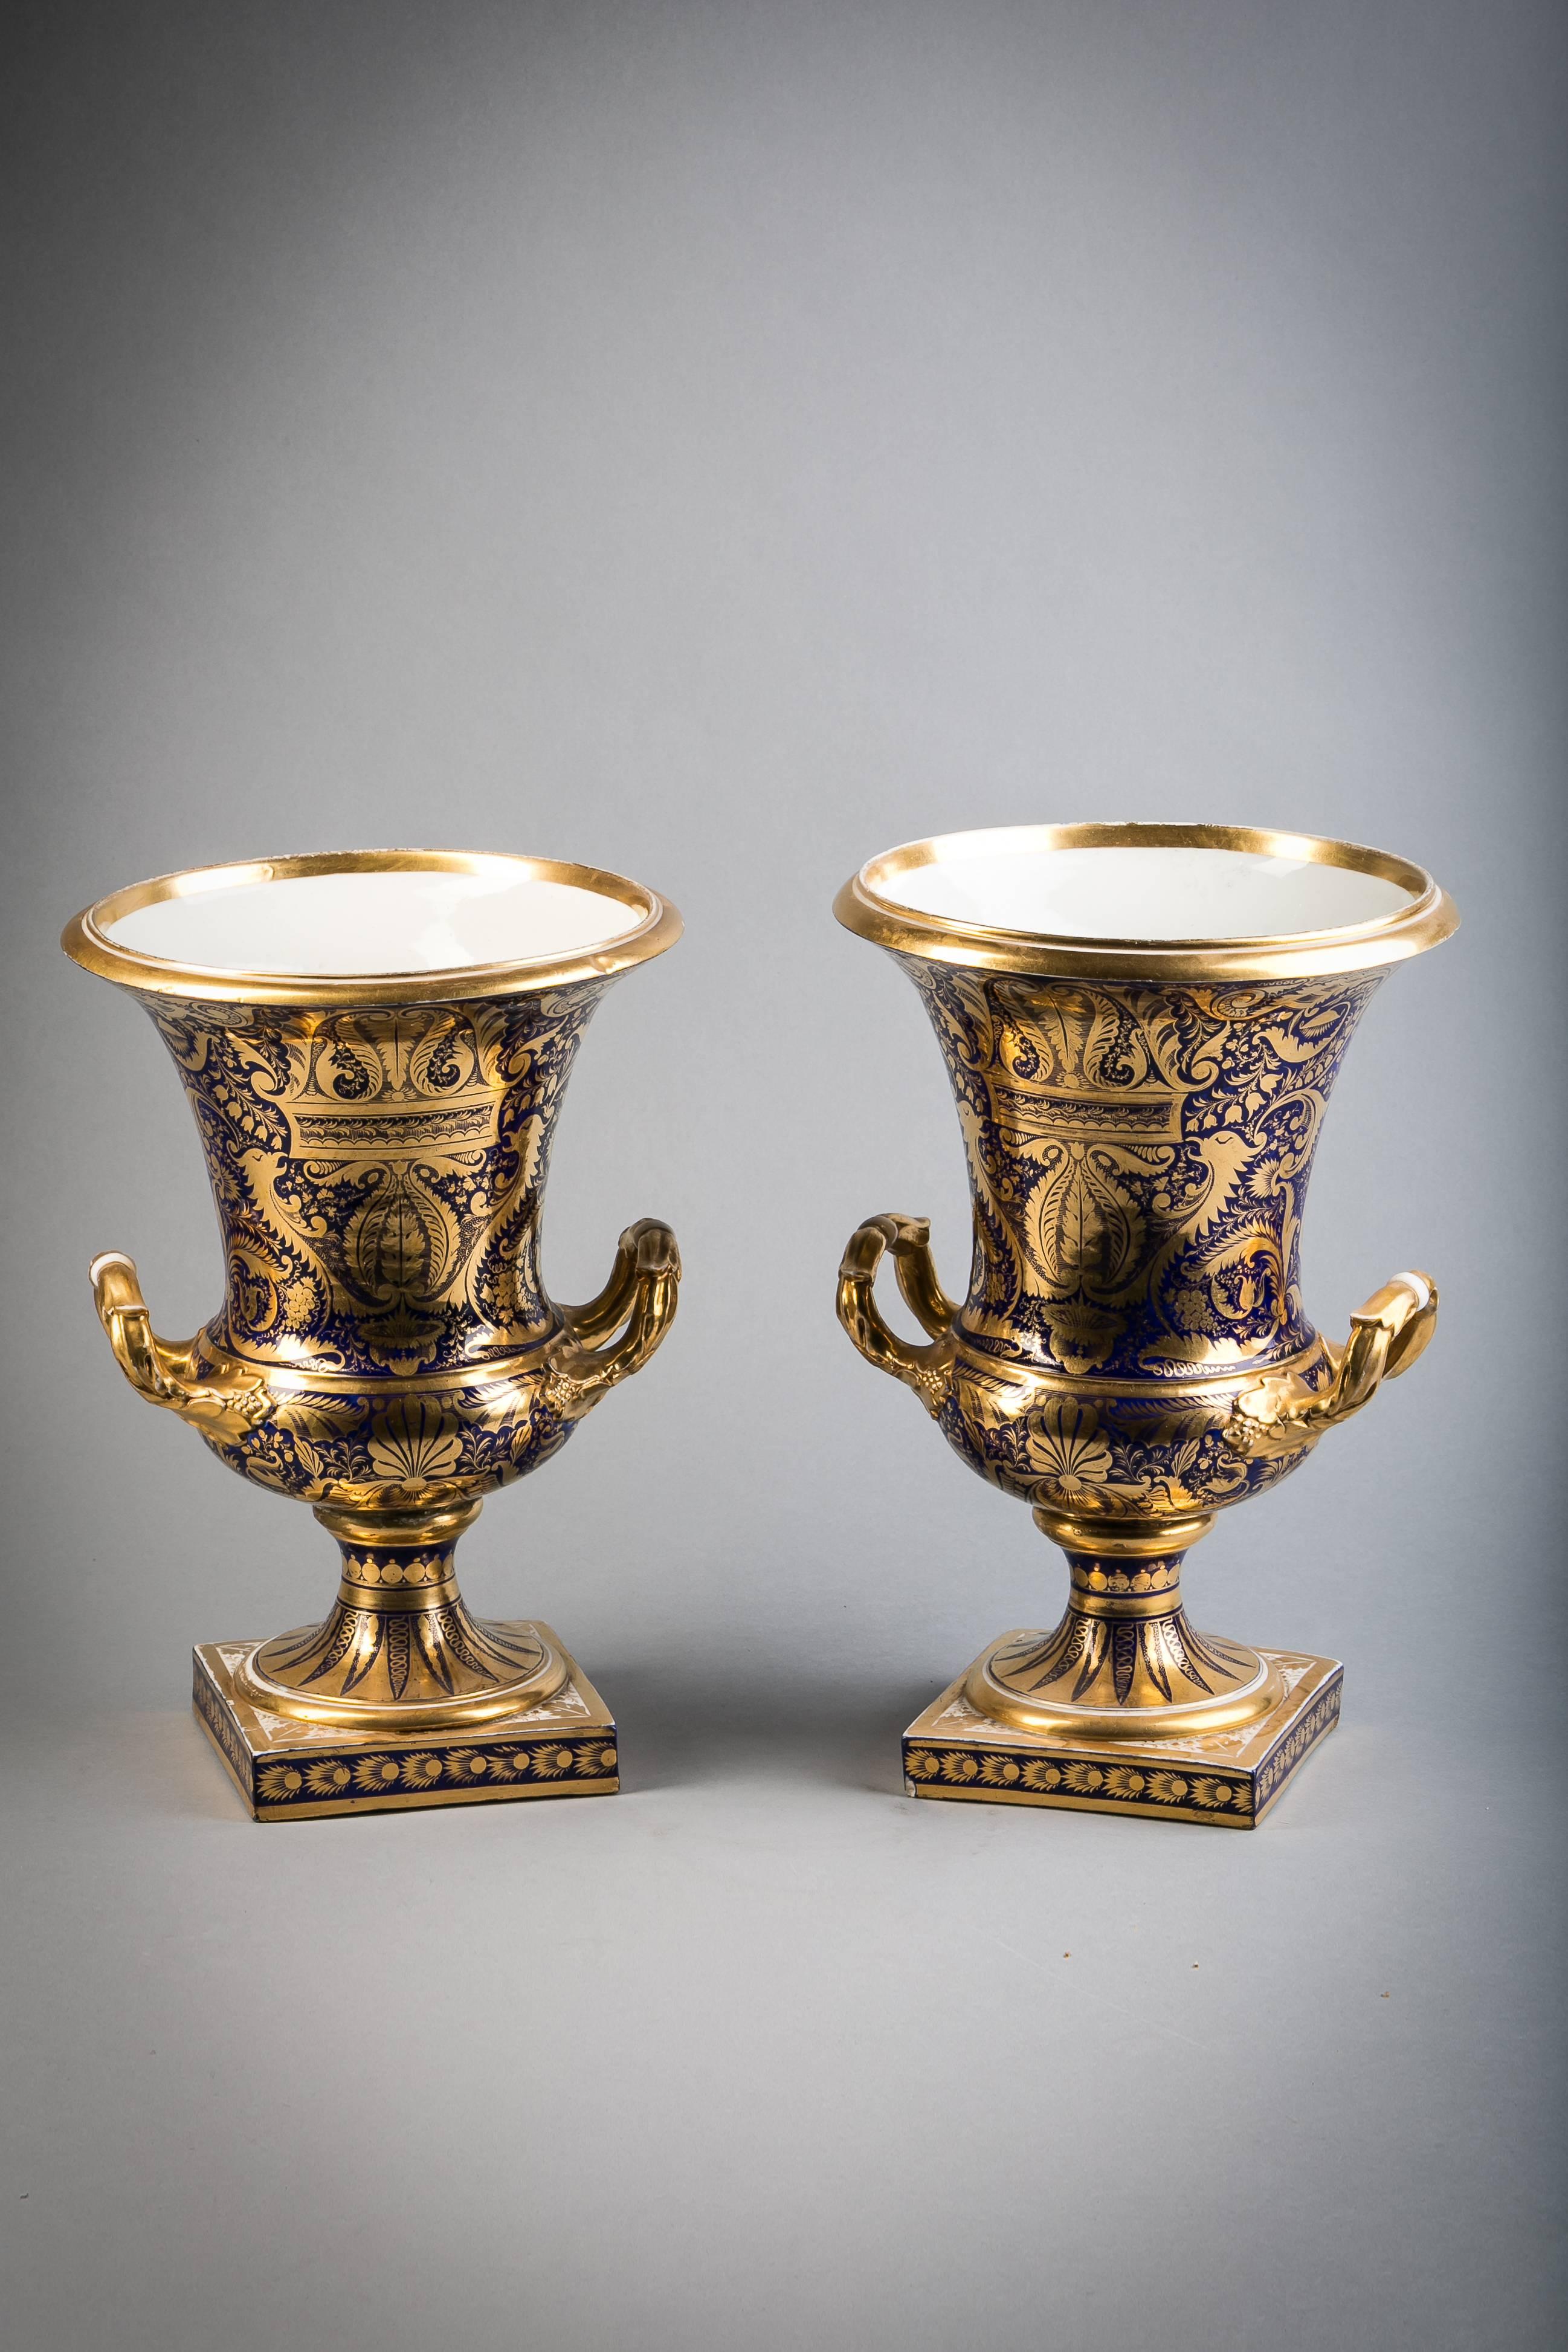 Pair of English porcelain vases, Derby, circa 1820 with shells.